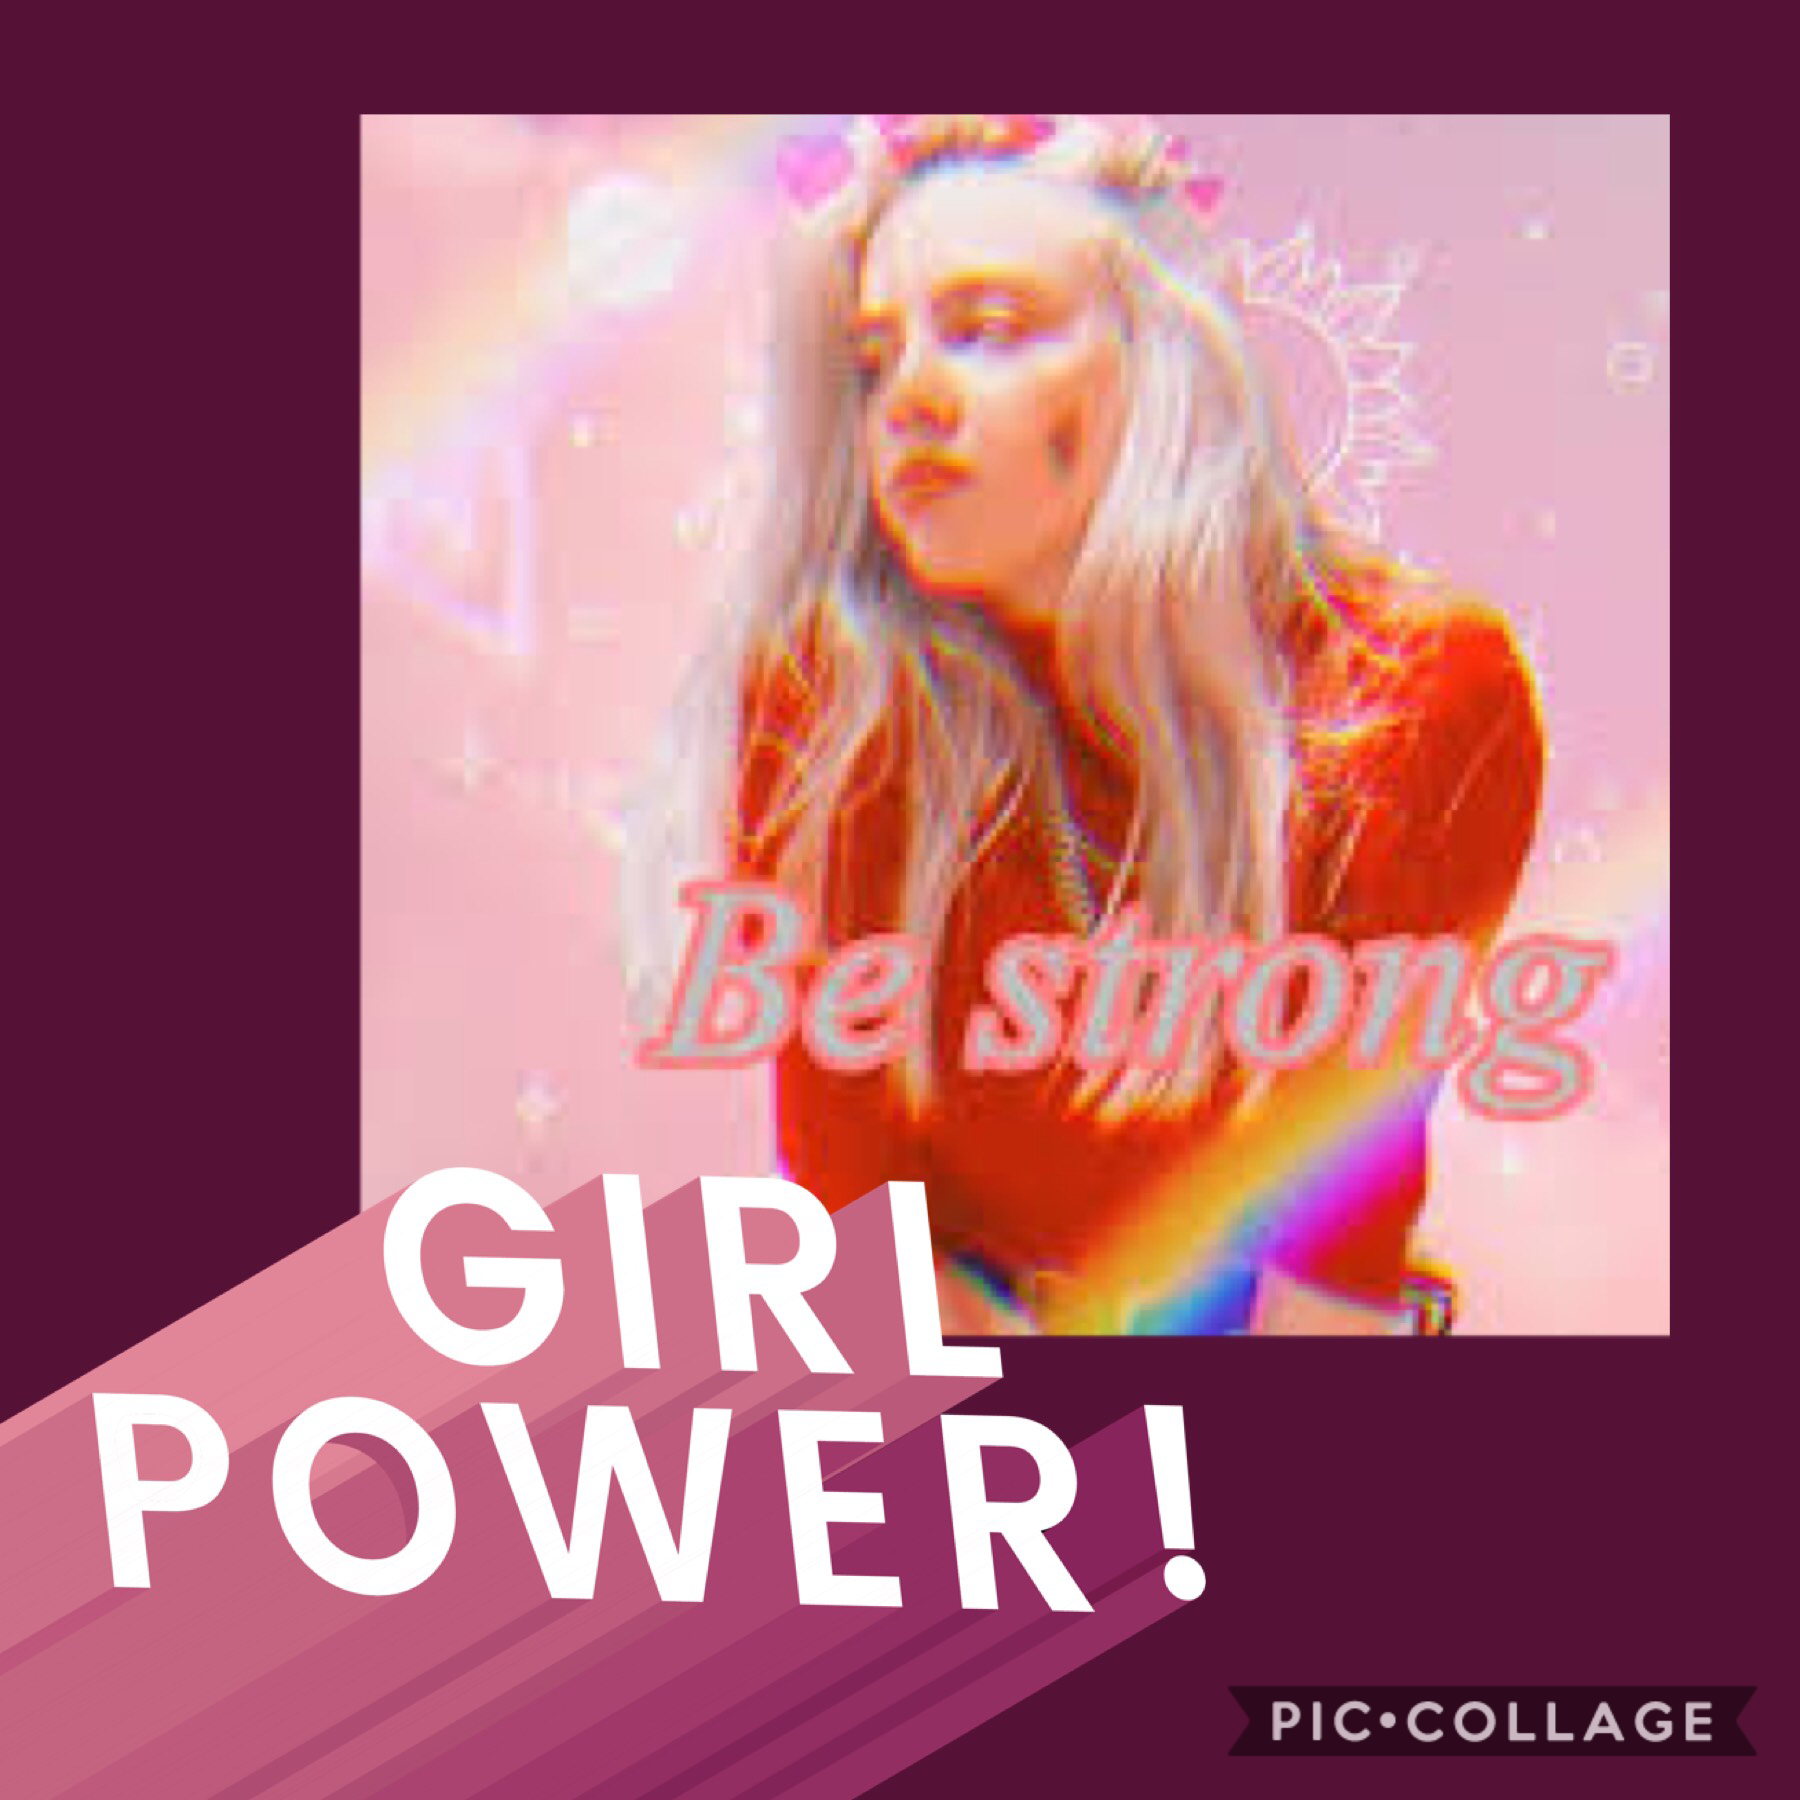 Girl be strong with power